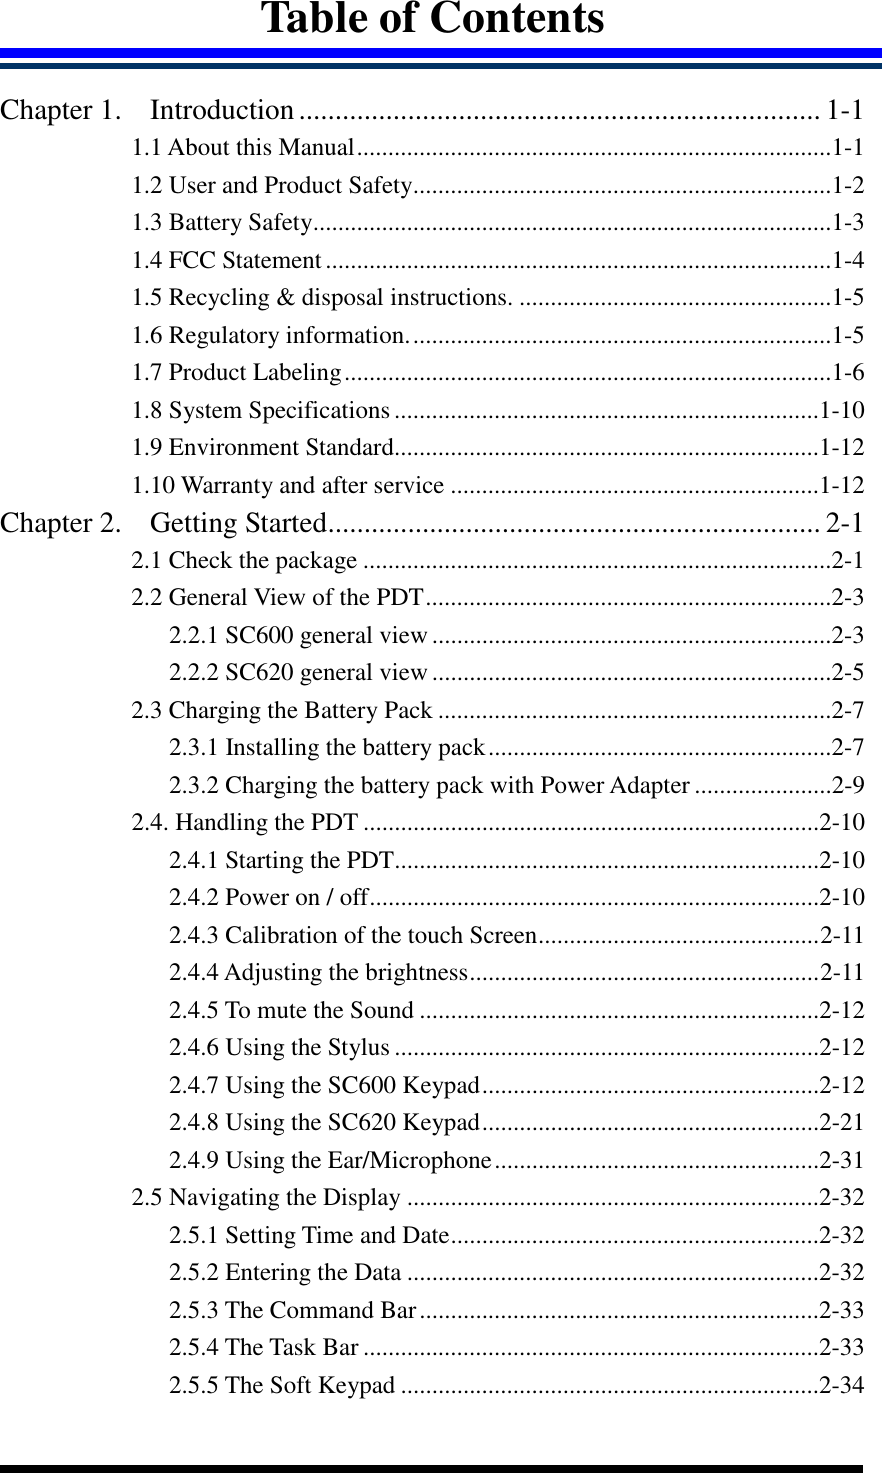  Table of Contents  Chapter 1. Introduction........................................................................ 1-1 1.1 About this Manual............................................................................1-1 1.2 User and Product Safety...................................................................1-2 1.3 Battery Safety...................................................................................1-3 1.4 FCC Statement.................................................................................1-4 1.5 Recycling &amp; disposal instructions. ..................................................1-5 1.6 Regulatory information....................................................................1-5 1.7 Product Labeling..............................................................................1-6 1.8 System Specifications ....................................................................1-10 1.9 Environment Standard....................................................................1-12 1.10 Warranty and after service ...........................................................1-12 Chapter 2. Getting Started.................................................................... 2-1 2.1 Check the package ...........................................................................2-1 2.2 General View of the PDT.................................................................2-3 2.2.1 SC600 general view ................................................................2-3 2.2.2 SC620 general view ................................................................2-5 2.3 Charging the Battery Pack ...............................................................2-7 2.3.1 Installing the battery pack.......................................................2-7 2.3.2 Charging the battery pack with Power Adapter ......................2-9 2.4. Handling the PDT .........................................................................2-10 2.4.1 Starting the PDT....................................................................2-10 2.4.2 Power on / off........................................................................2-10 2.4.3 Calibration of the touch Screen.............................................2-11 2.4.4 Adjusting the brightness........................................................2-11 2.4.5 To mute the Sound ................................................................2-12 2.4.6 Using the Stylus ....................................................................2-12 2.4.7 Using the SC600 Keypad......................................................2-12 2.4.8 Using the SC620 Keypad......................................................2-21 2.4.9 Using the Ear/Microphone....................................................2-31 2.5 Navigating the Display ..................................................................2-32 2.5.1 Setting Time and Date...........................................................2-32 2.5.2 Entering the Data ..................................................................2-32 2.5.3 The Command Bar................................................................2-33 2.5.4 The Task Bar .........................................................................2-33 2.5.5 The Soft Keypad ...................................................................2-34 